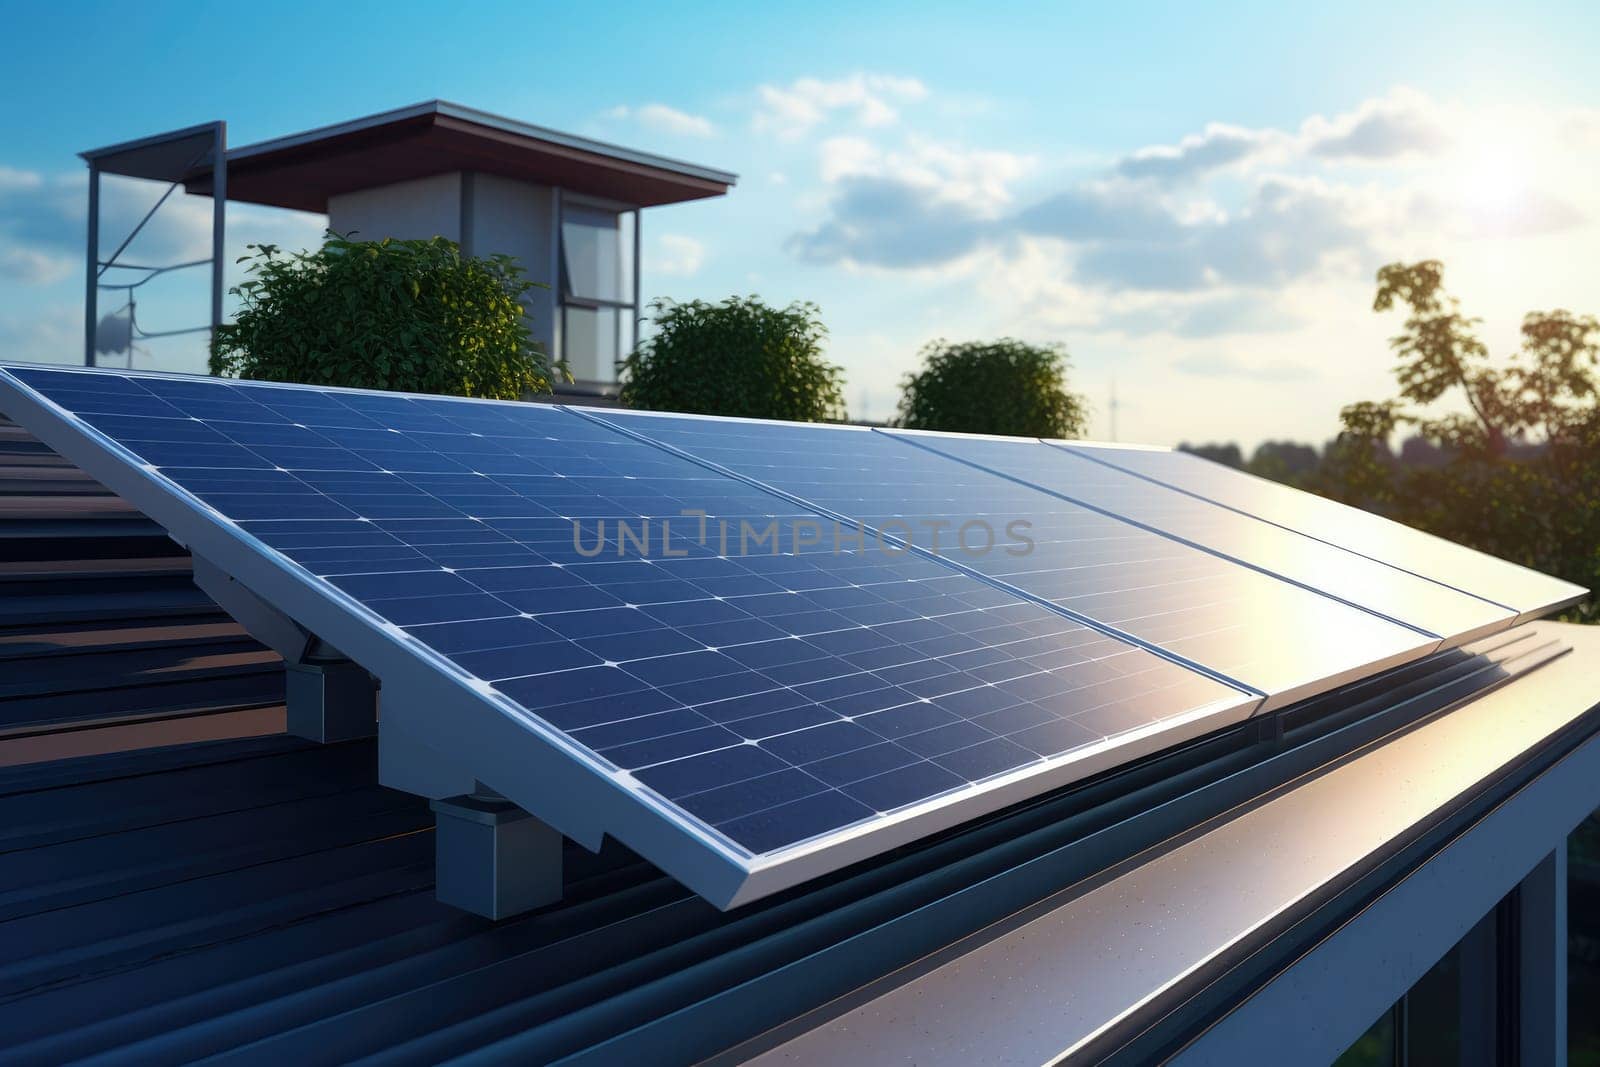 Solar Panel Installation on Rooftop of Modern Building for Renewable Energy Generation by Yurich32